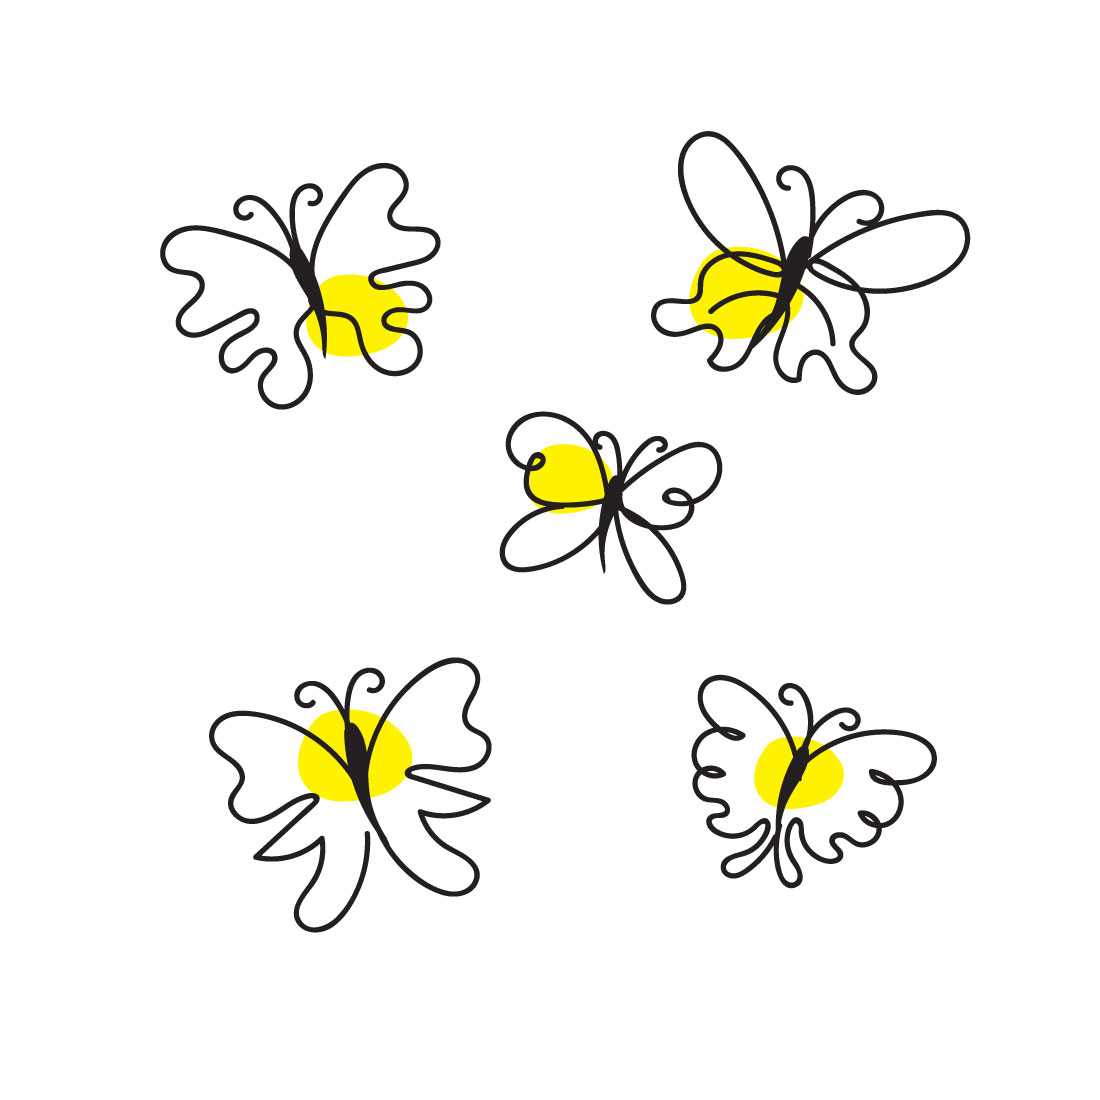 Four yellow and black butterflies on a white background.